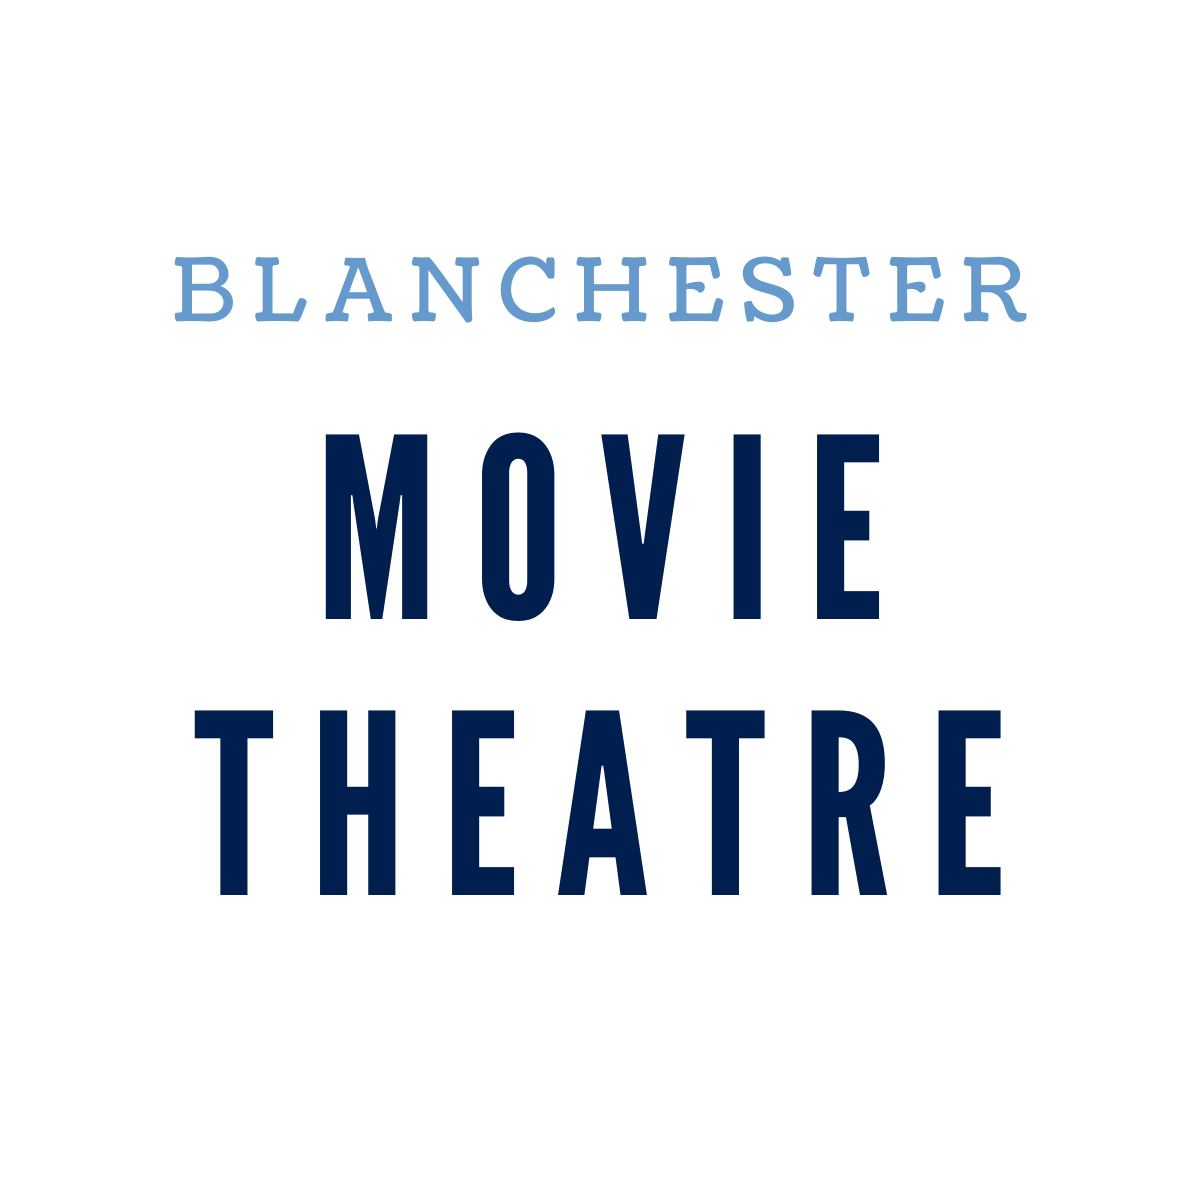 Blanchester Movie Theater